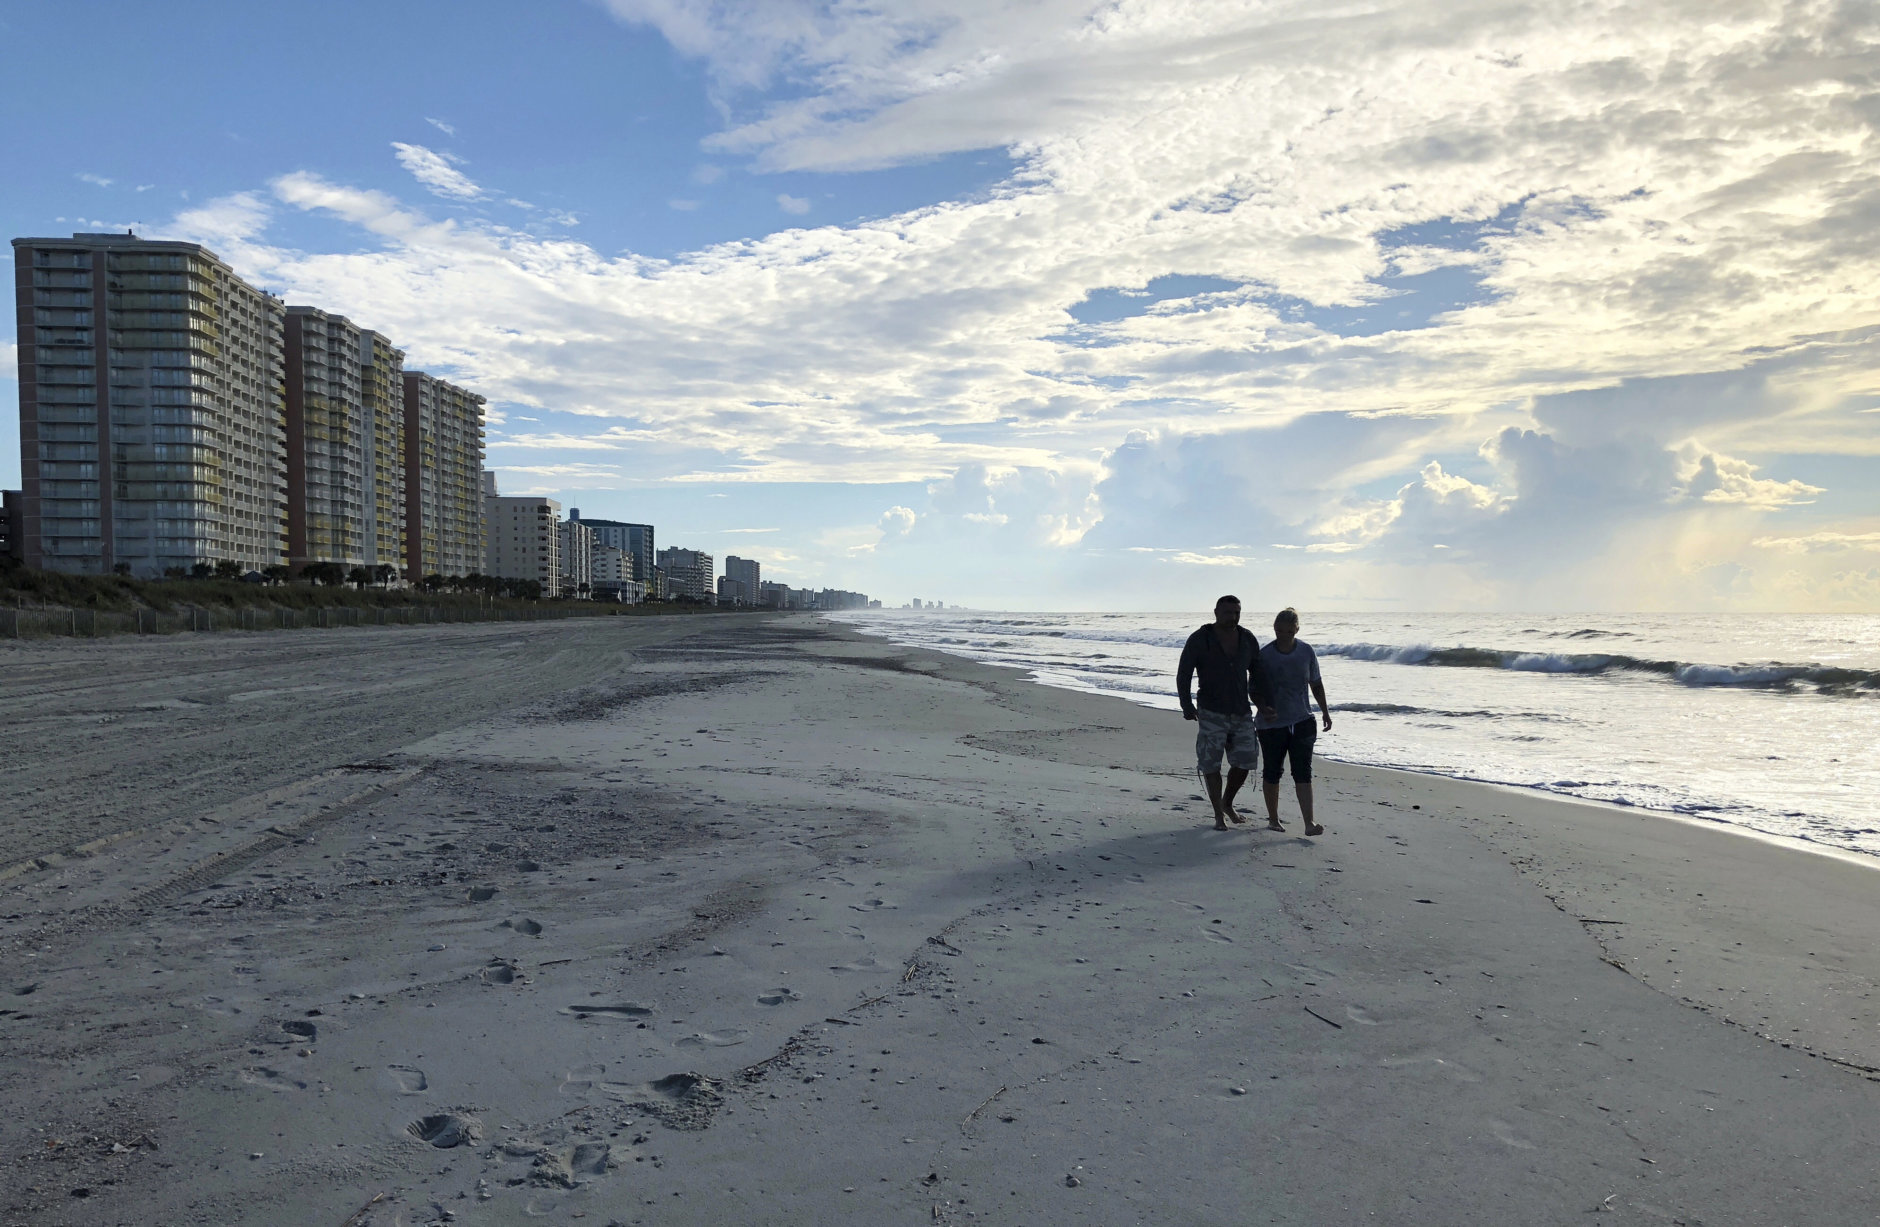 Chris and Nicole Roland walk down a beach in North Myrtle Beach, S.C. on Wednesday, Sept. 12, 2018. The couple boarded up their uncle's condominium and are leaving soon as Hurricane Florence approaches. (AP Photo/Jeffery Collins)